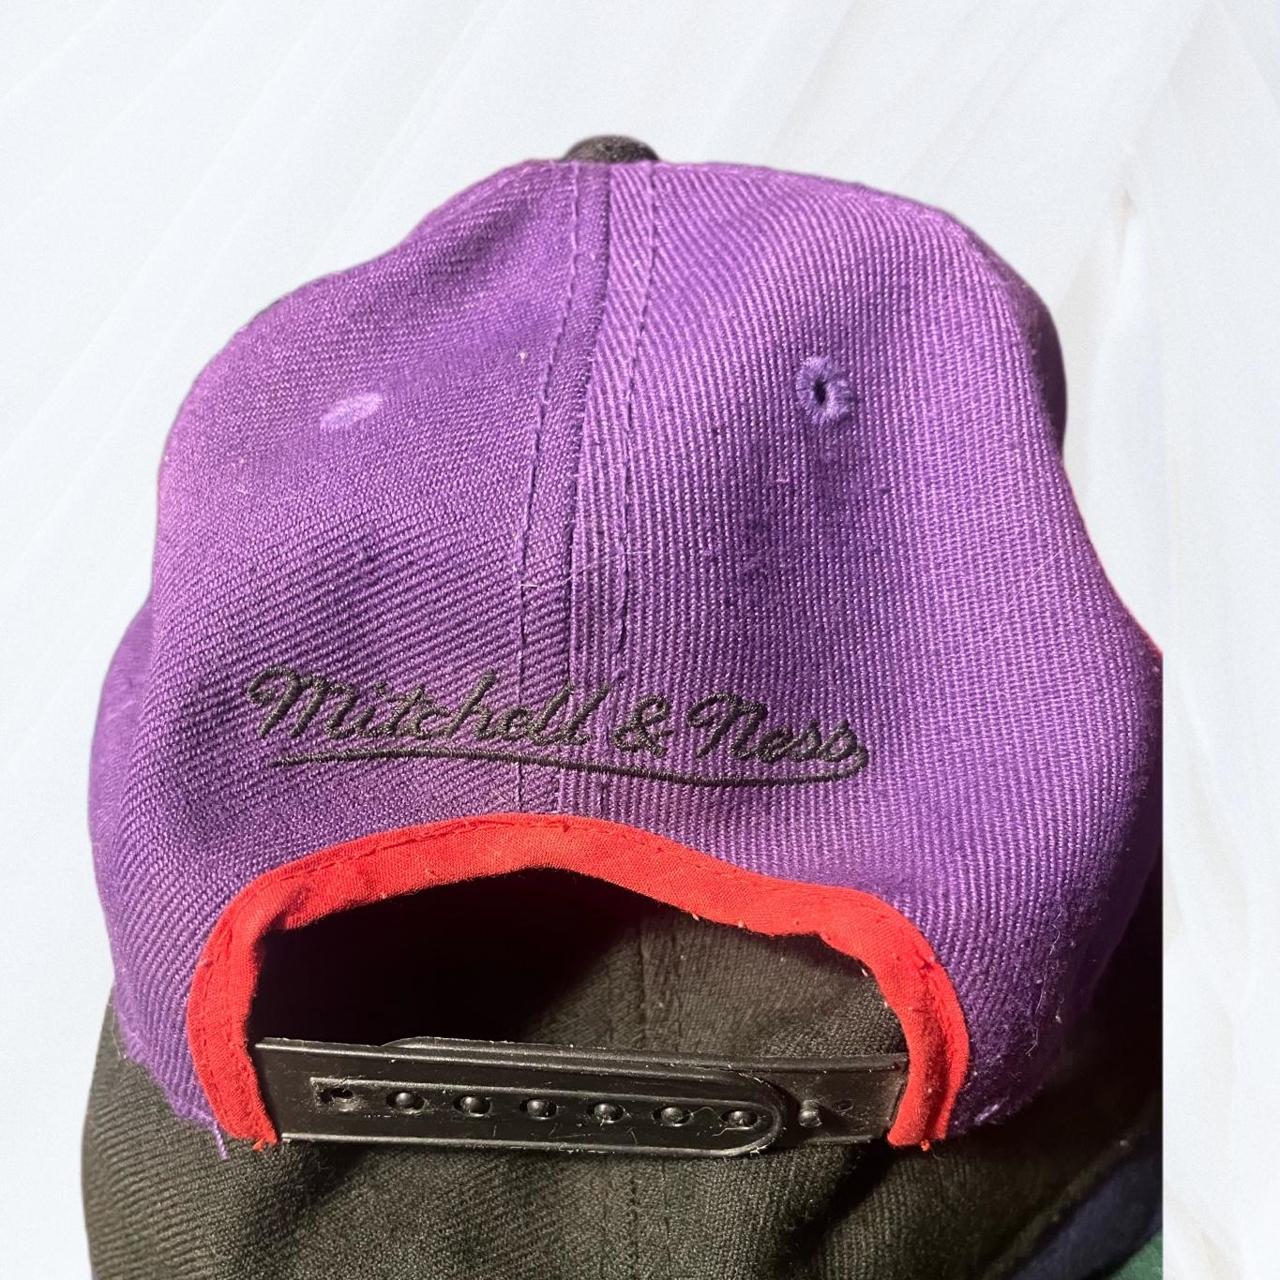 NBA Men's Purple and Red Hat (2)